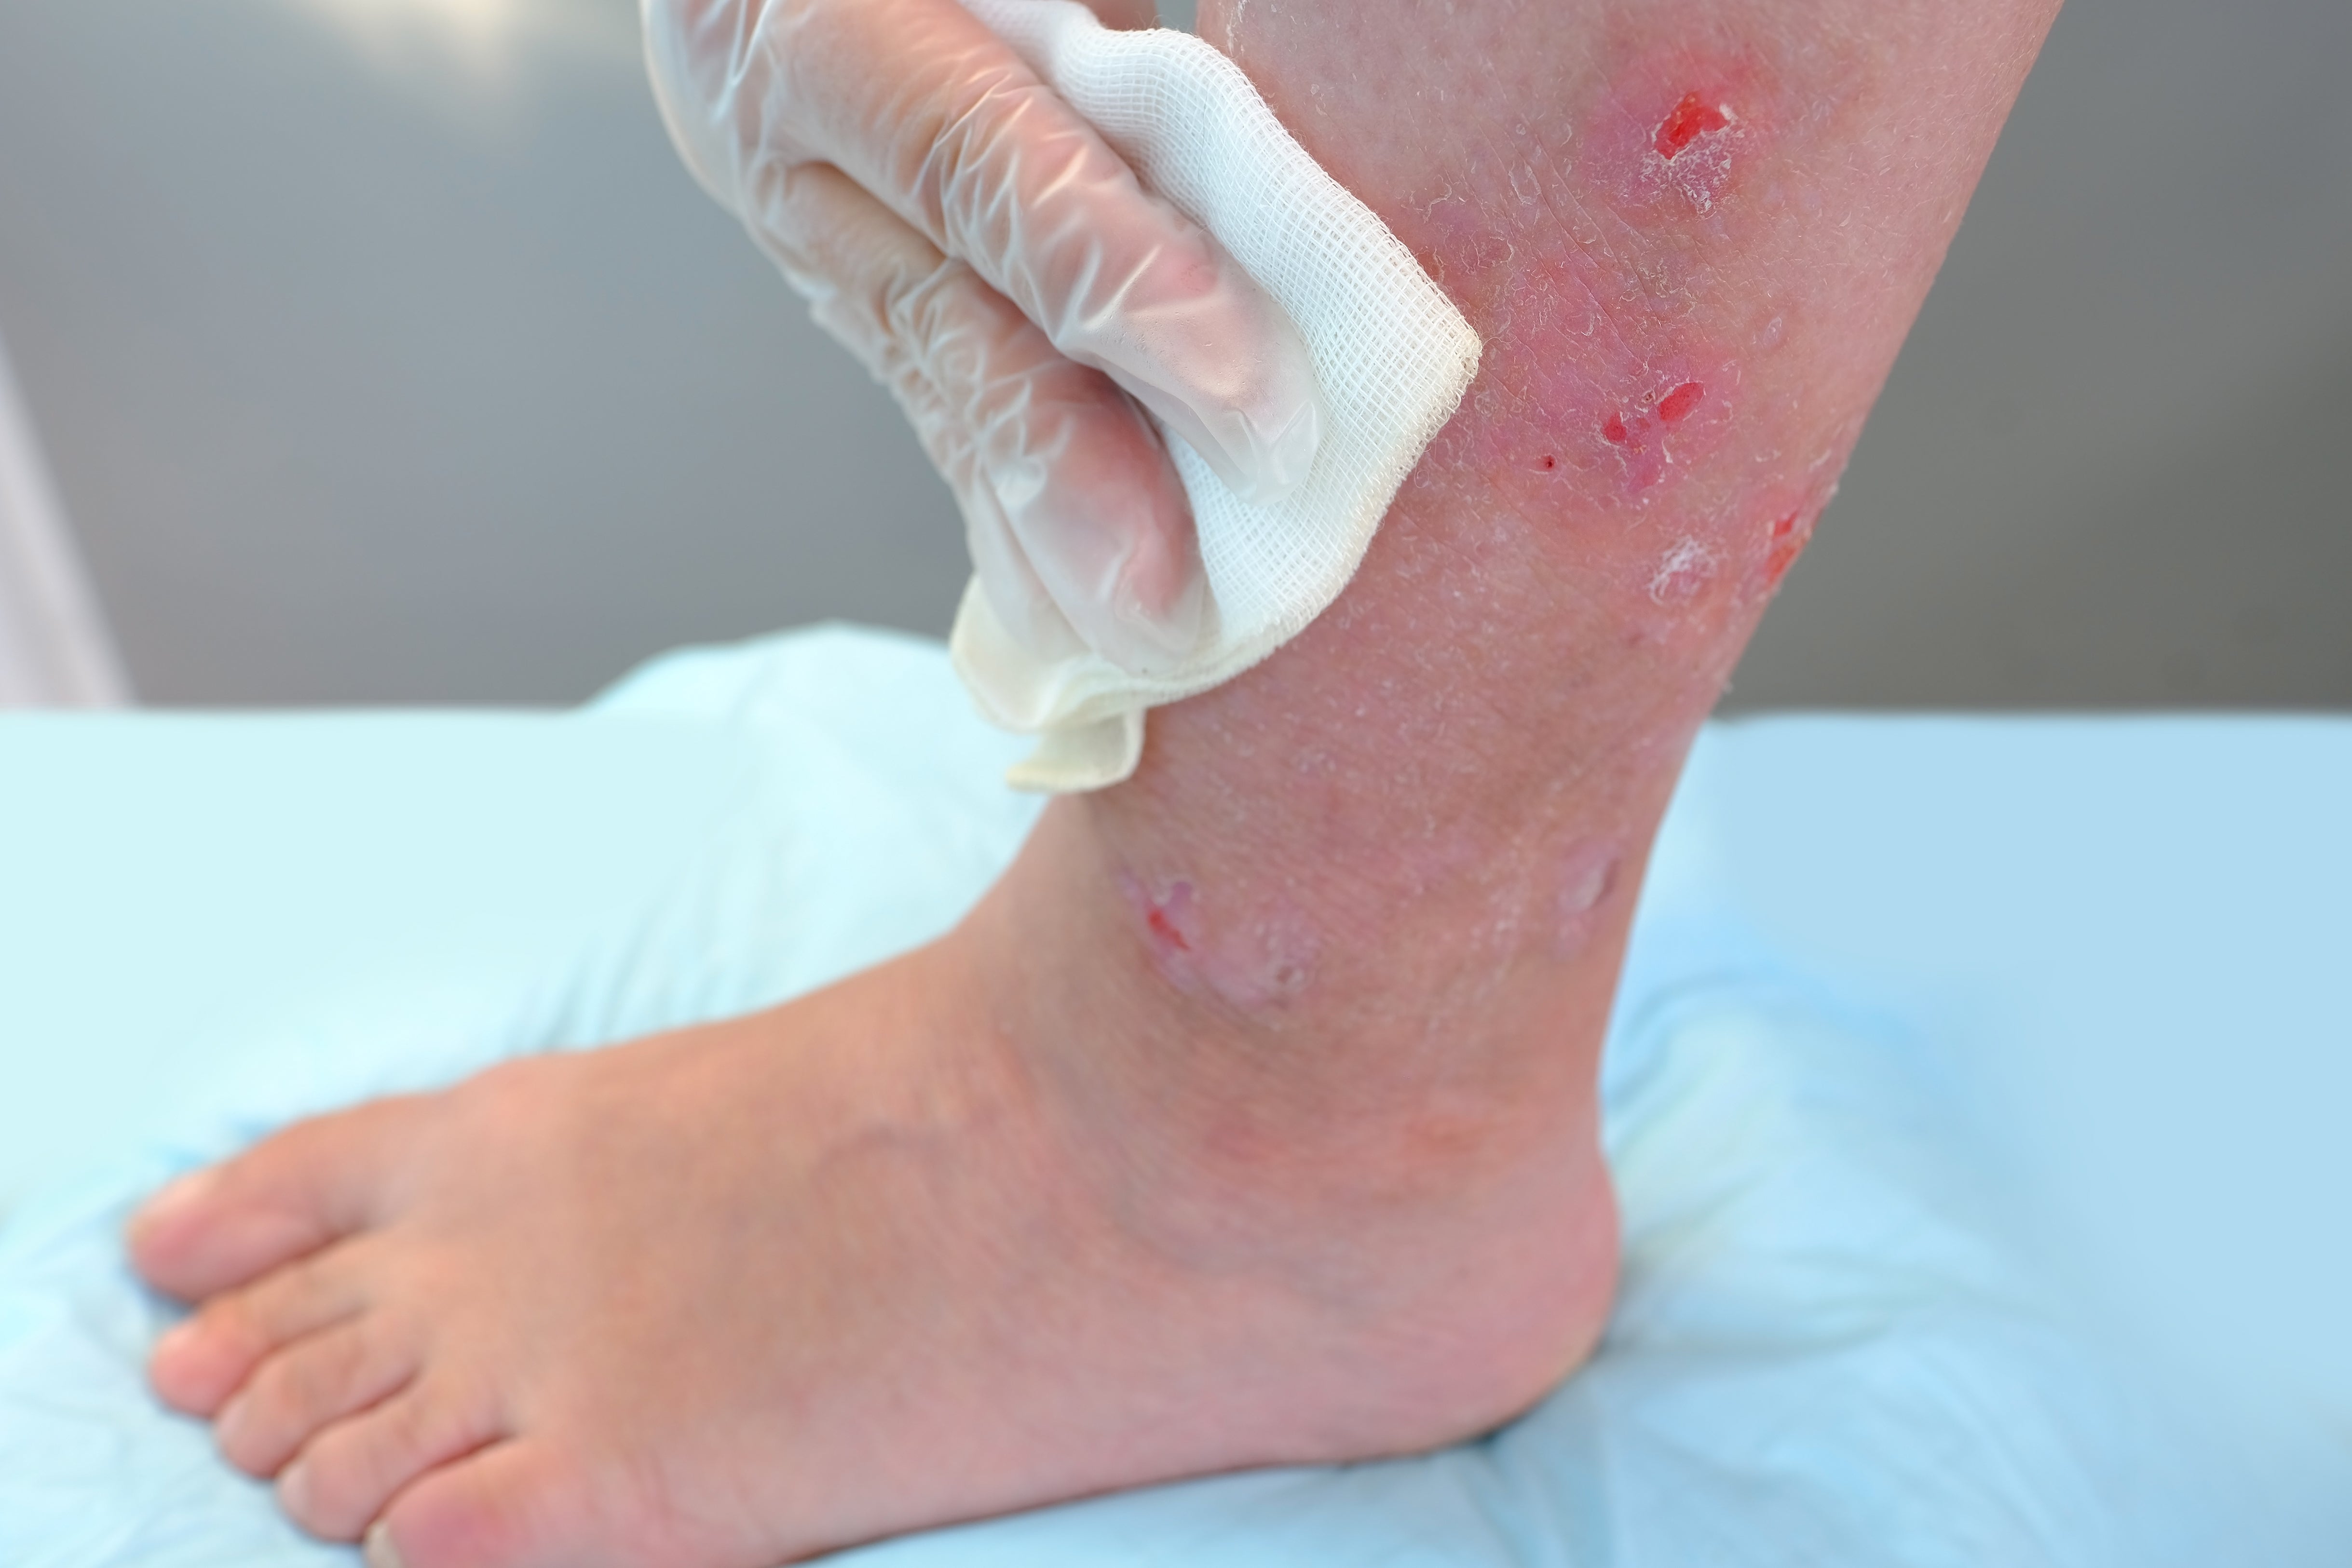  Factors & complications of diabetes that affect wound healing